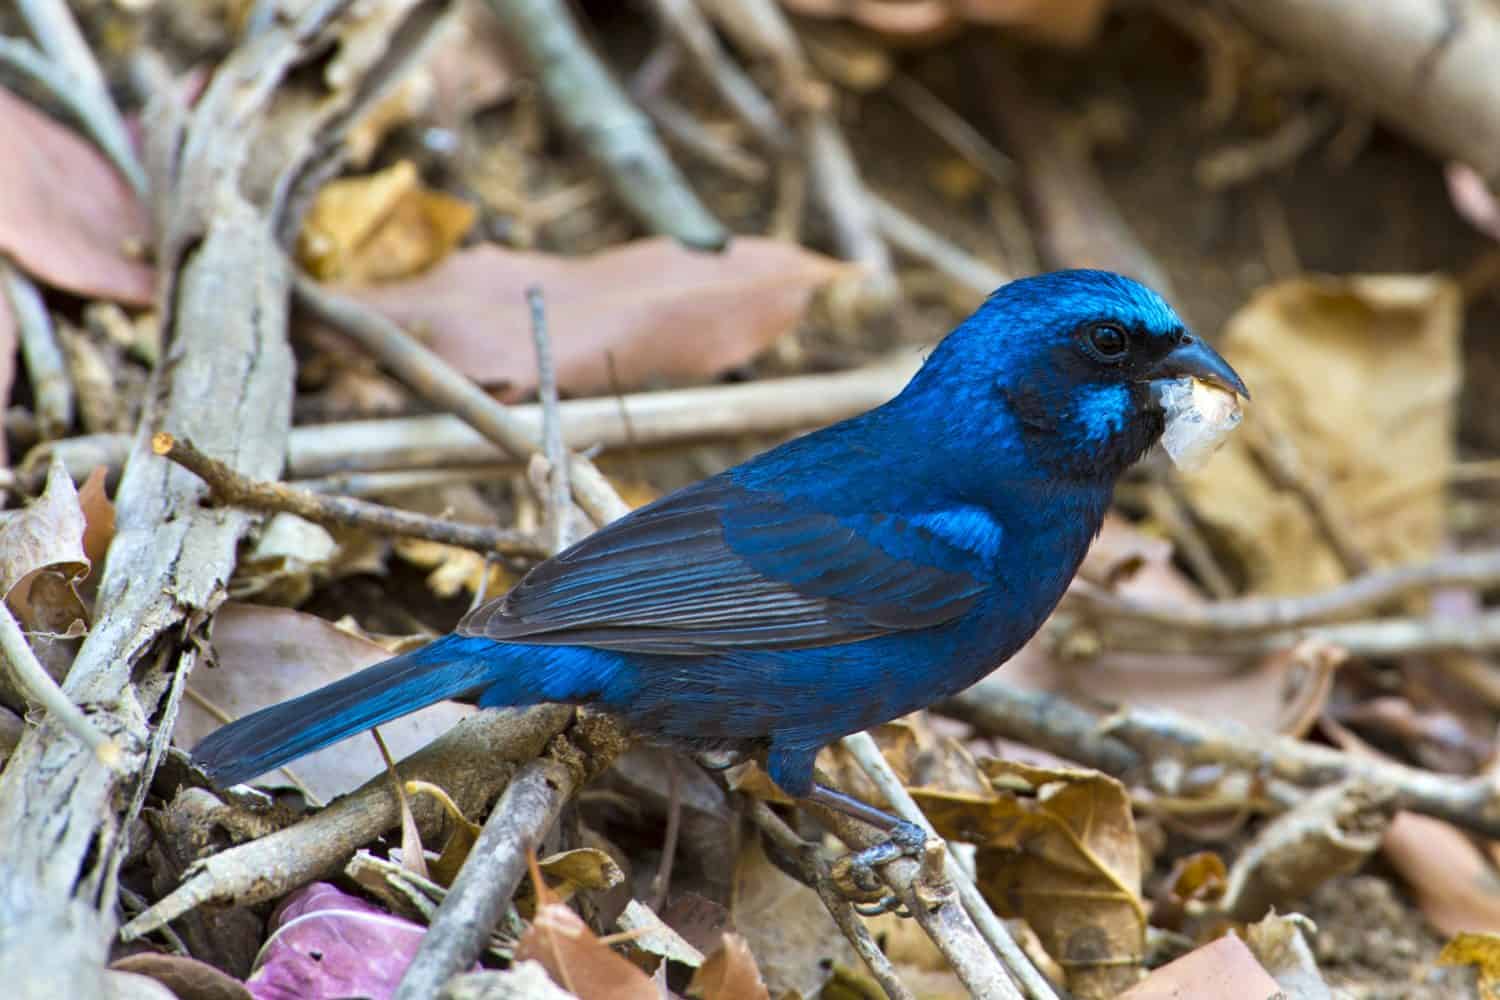 Blue Bunting in West Mexico/ Male Blue Bunting (Cyanocompsa parellina) near the community of Ixtlahuahuey, south of Puerto Vallarta in the State of Jalisco, Mexico.